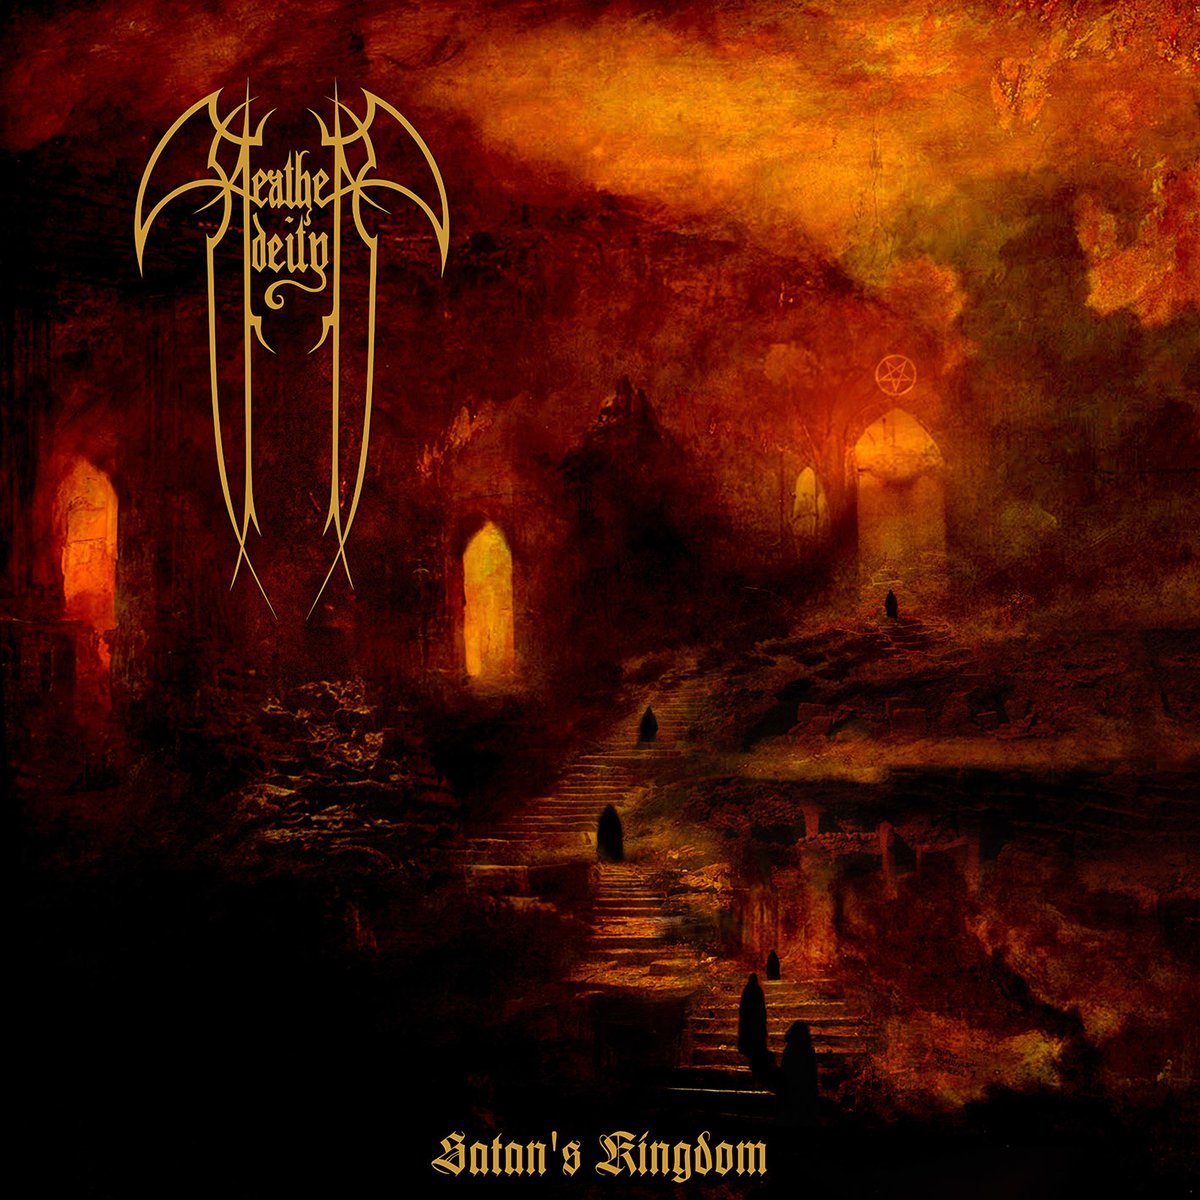 Coming later this year from Cult Never Dies...

HEATHEN DEITY: SATAN’S KINGDOM

The second album by one of the UK’s most devastating black metal bands. For fans of: Gorgoroth, Endstille, Hecate Enthroned, Marduk, Setherial, early Mayhem.
Cover art created by David Thiérrée.